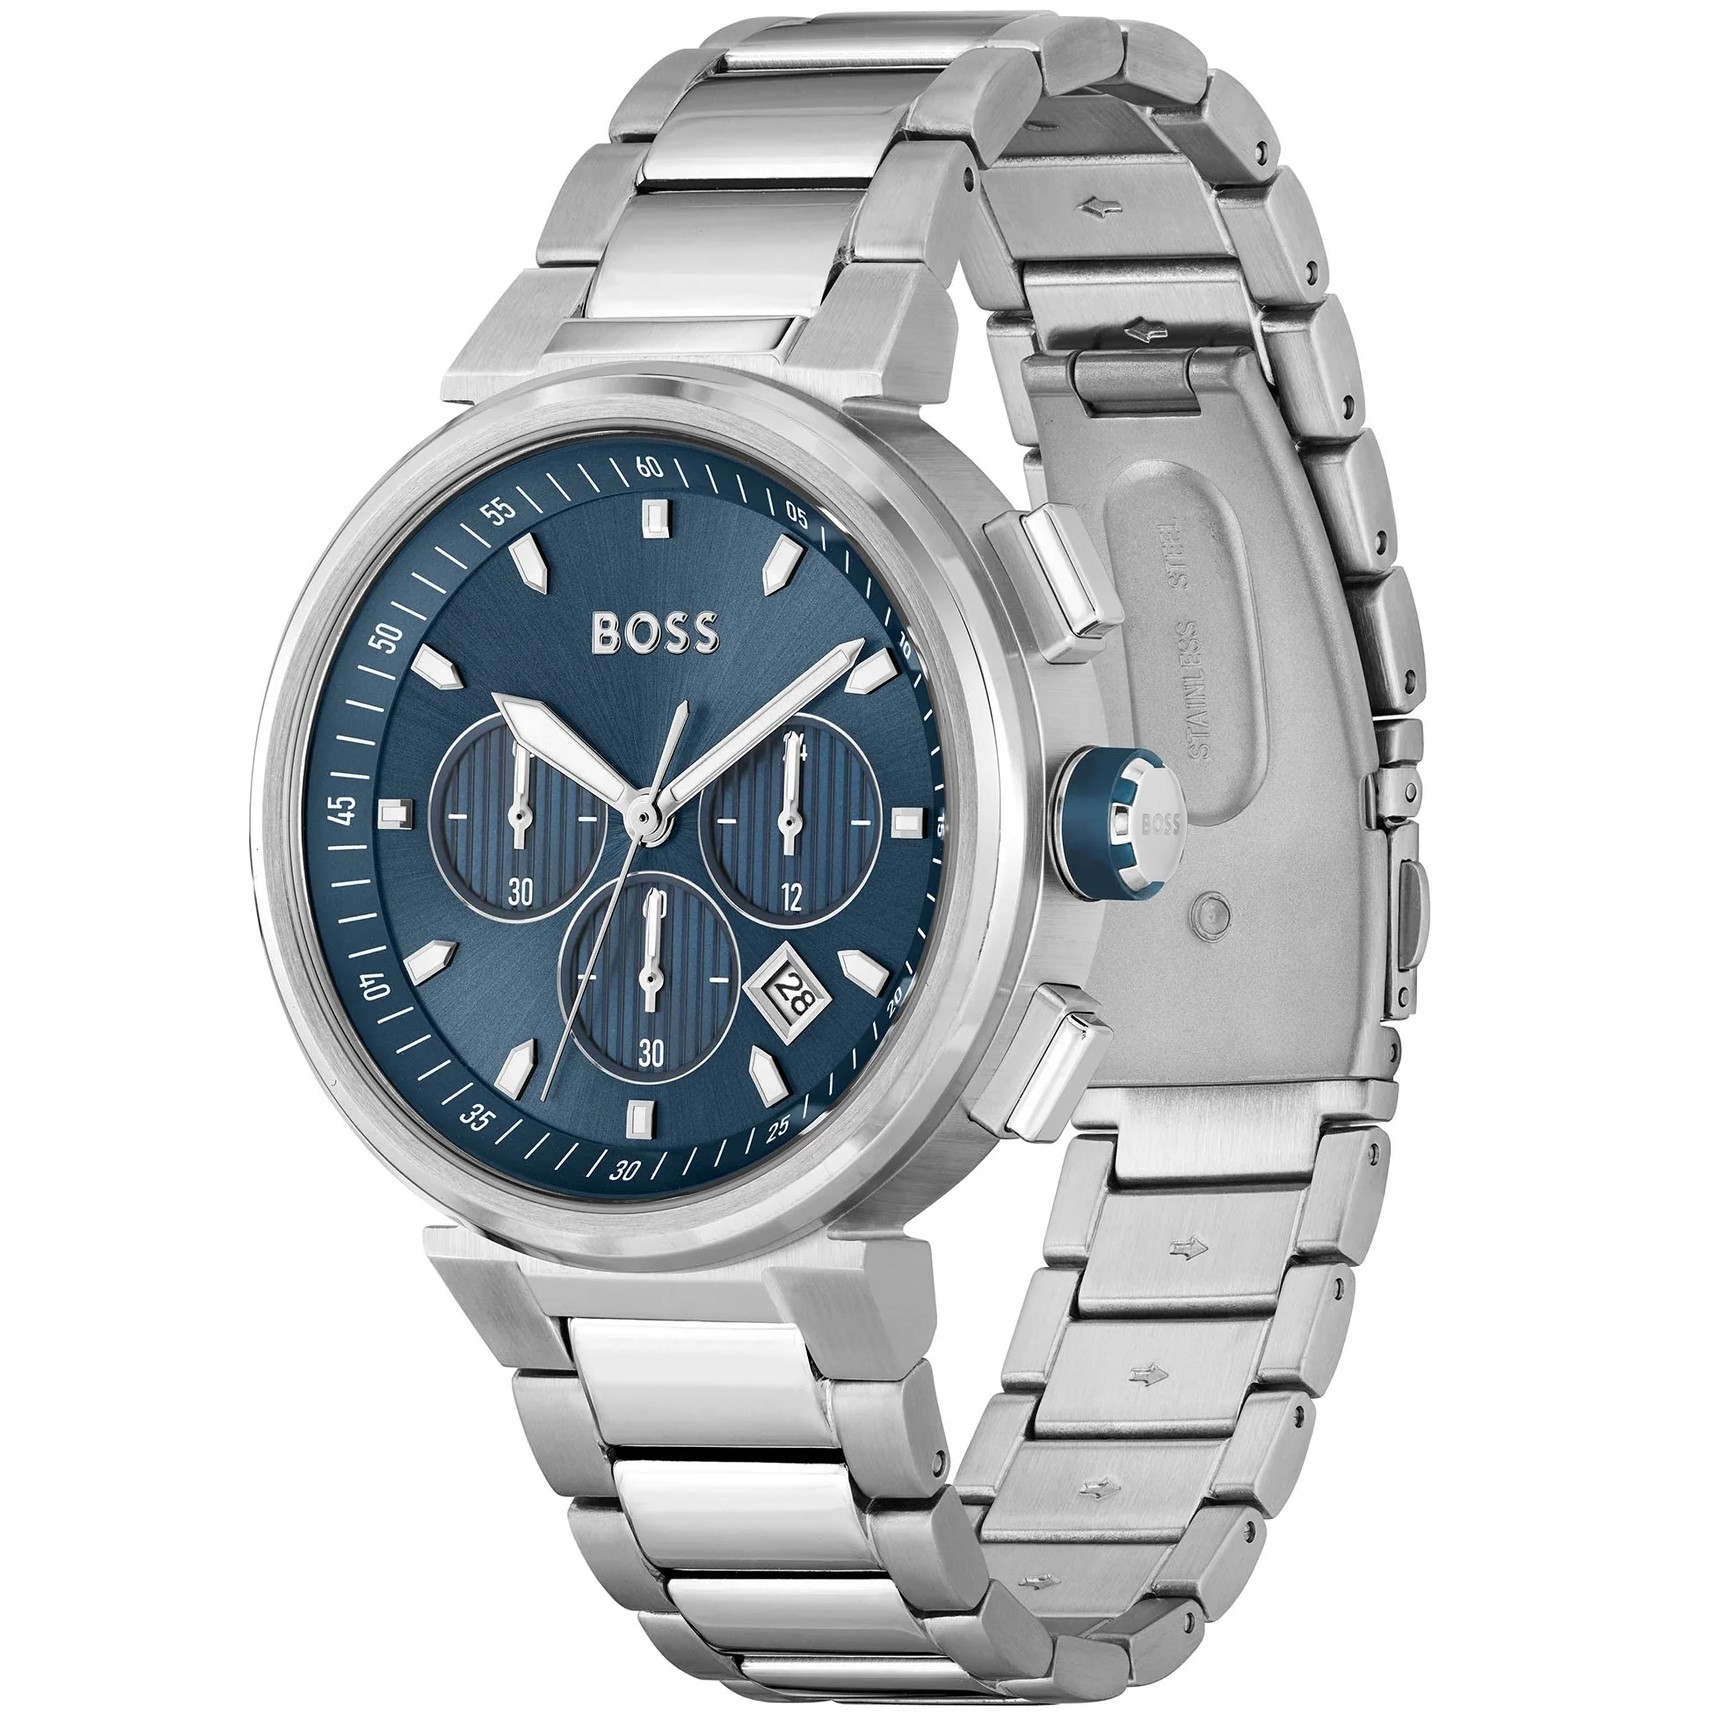 ĐỒNG HỒ NAM HUGO BOSS STAINLESS STEEL BLUE DIAL CHRONOGRAPH MENS WATCH 1513999 1